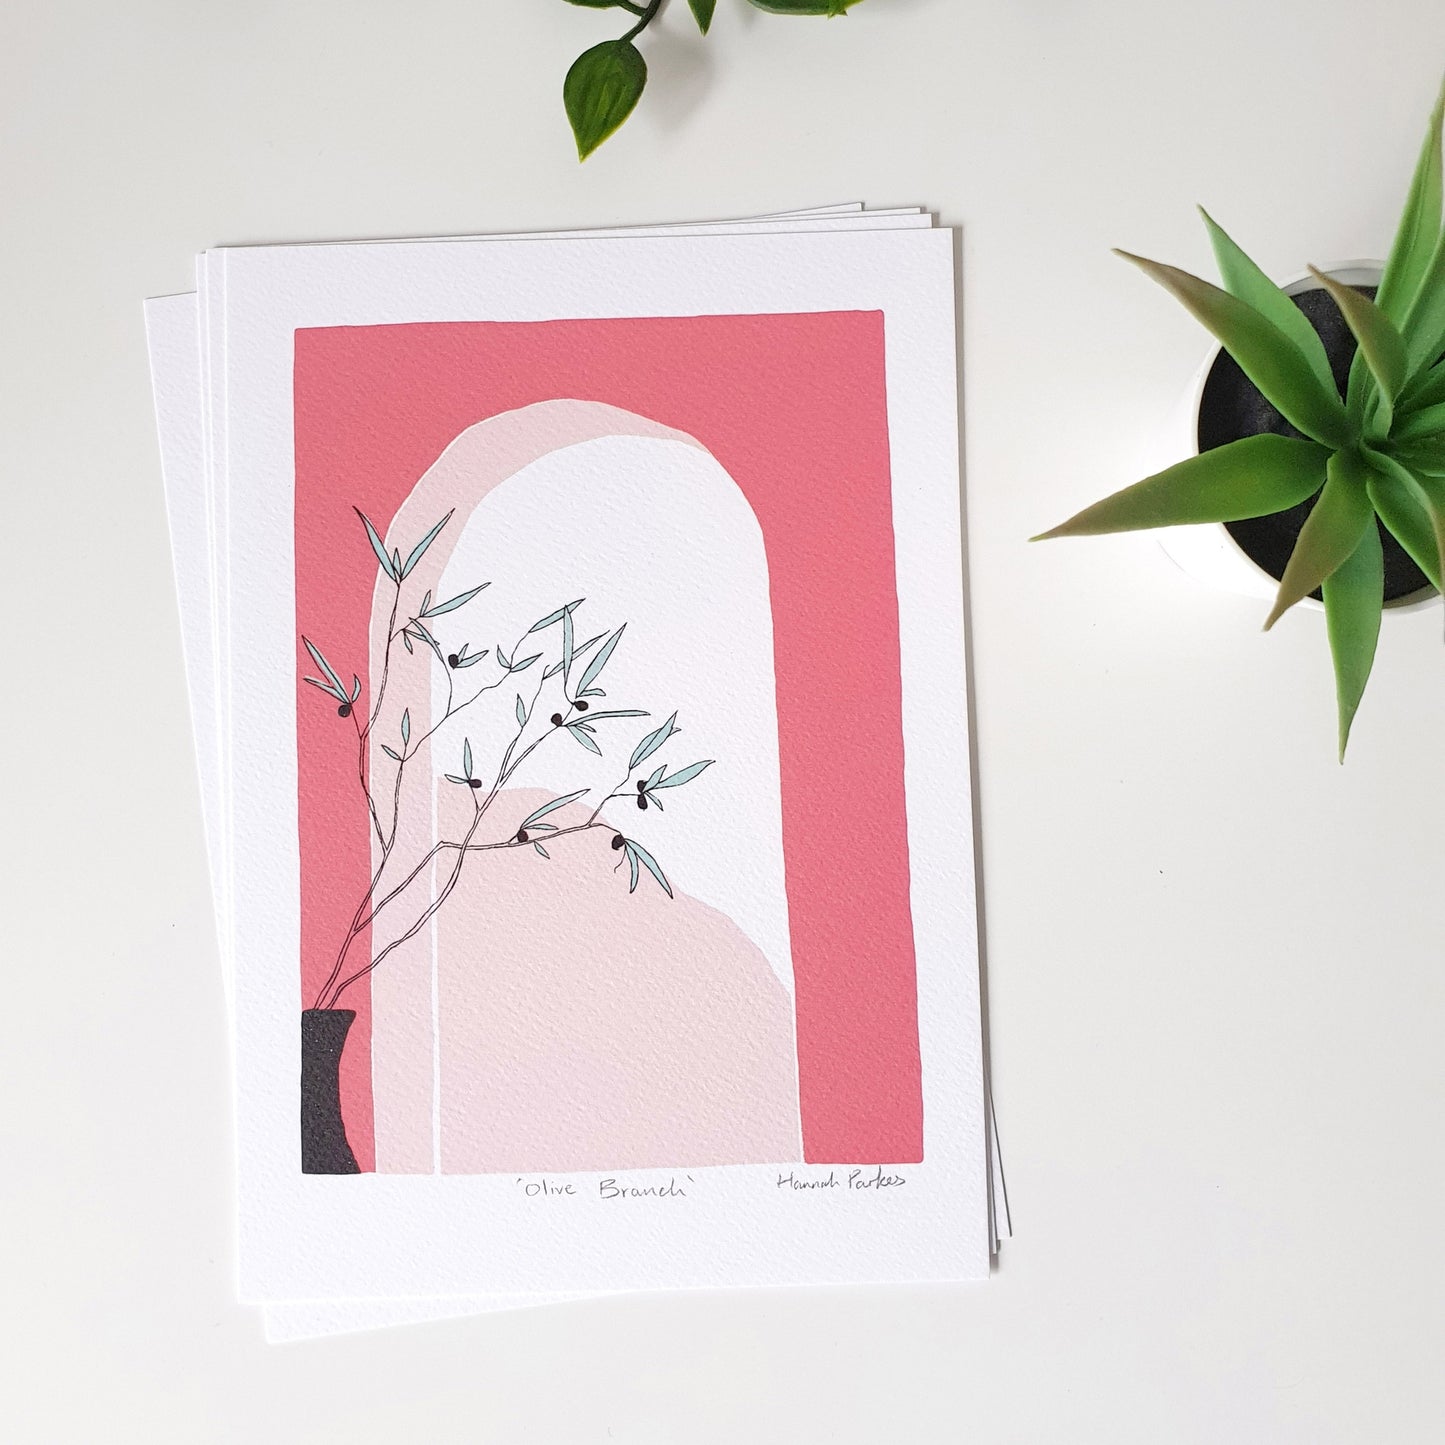 Olive Branch - A5 Print